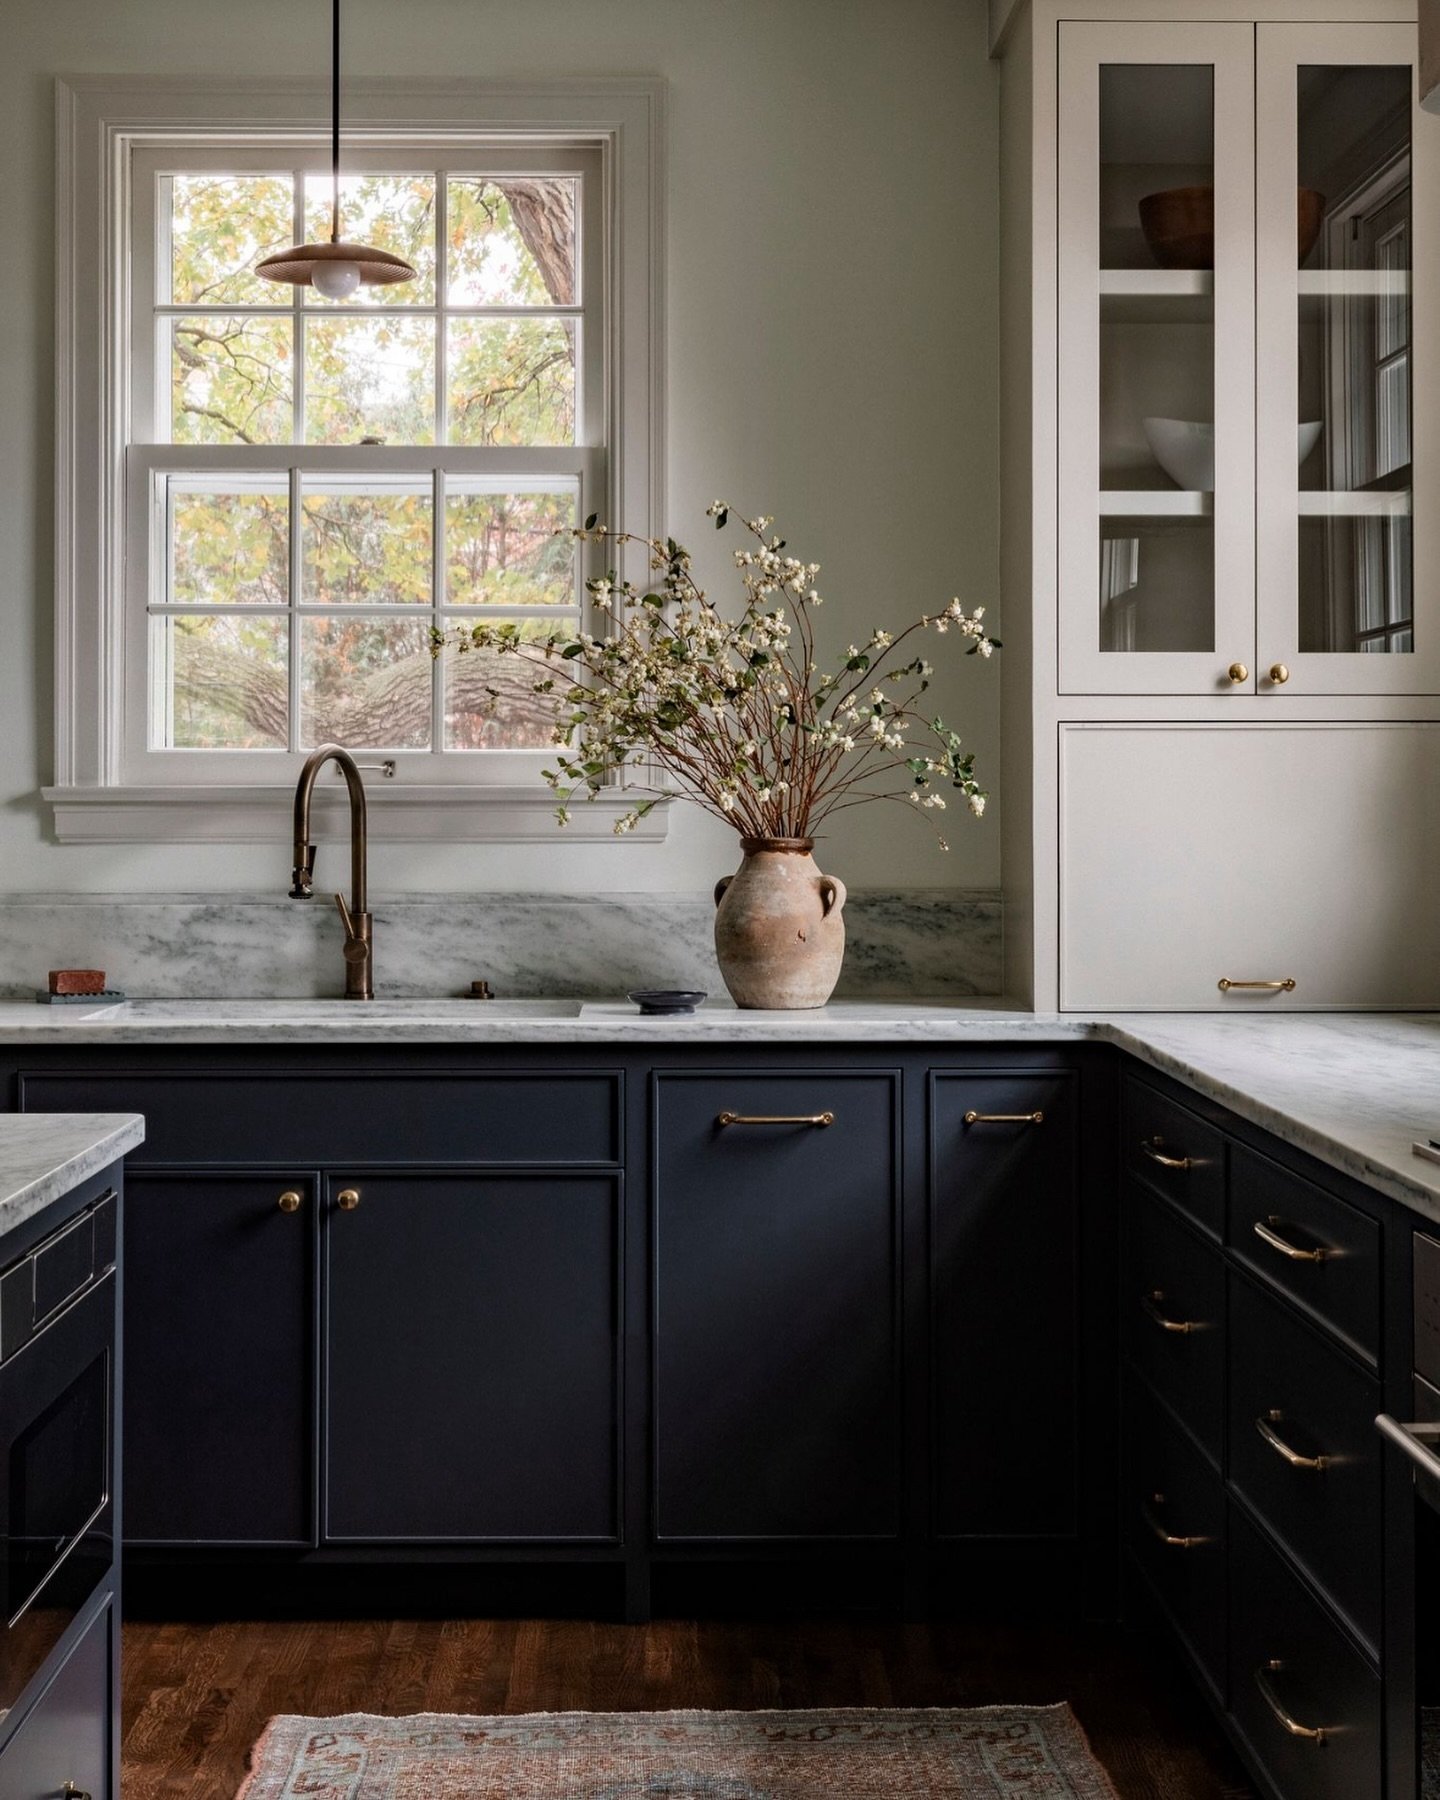 We&rsquo;ve got cabinetry on the mind, per usual. We&rsquo;re cooking up a collaboration with a cabinetry company we know you love (🥰). While we finalize the details, we&rsquo;d love to hear from you! What other collaborations would you like to see 